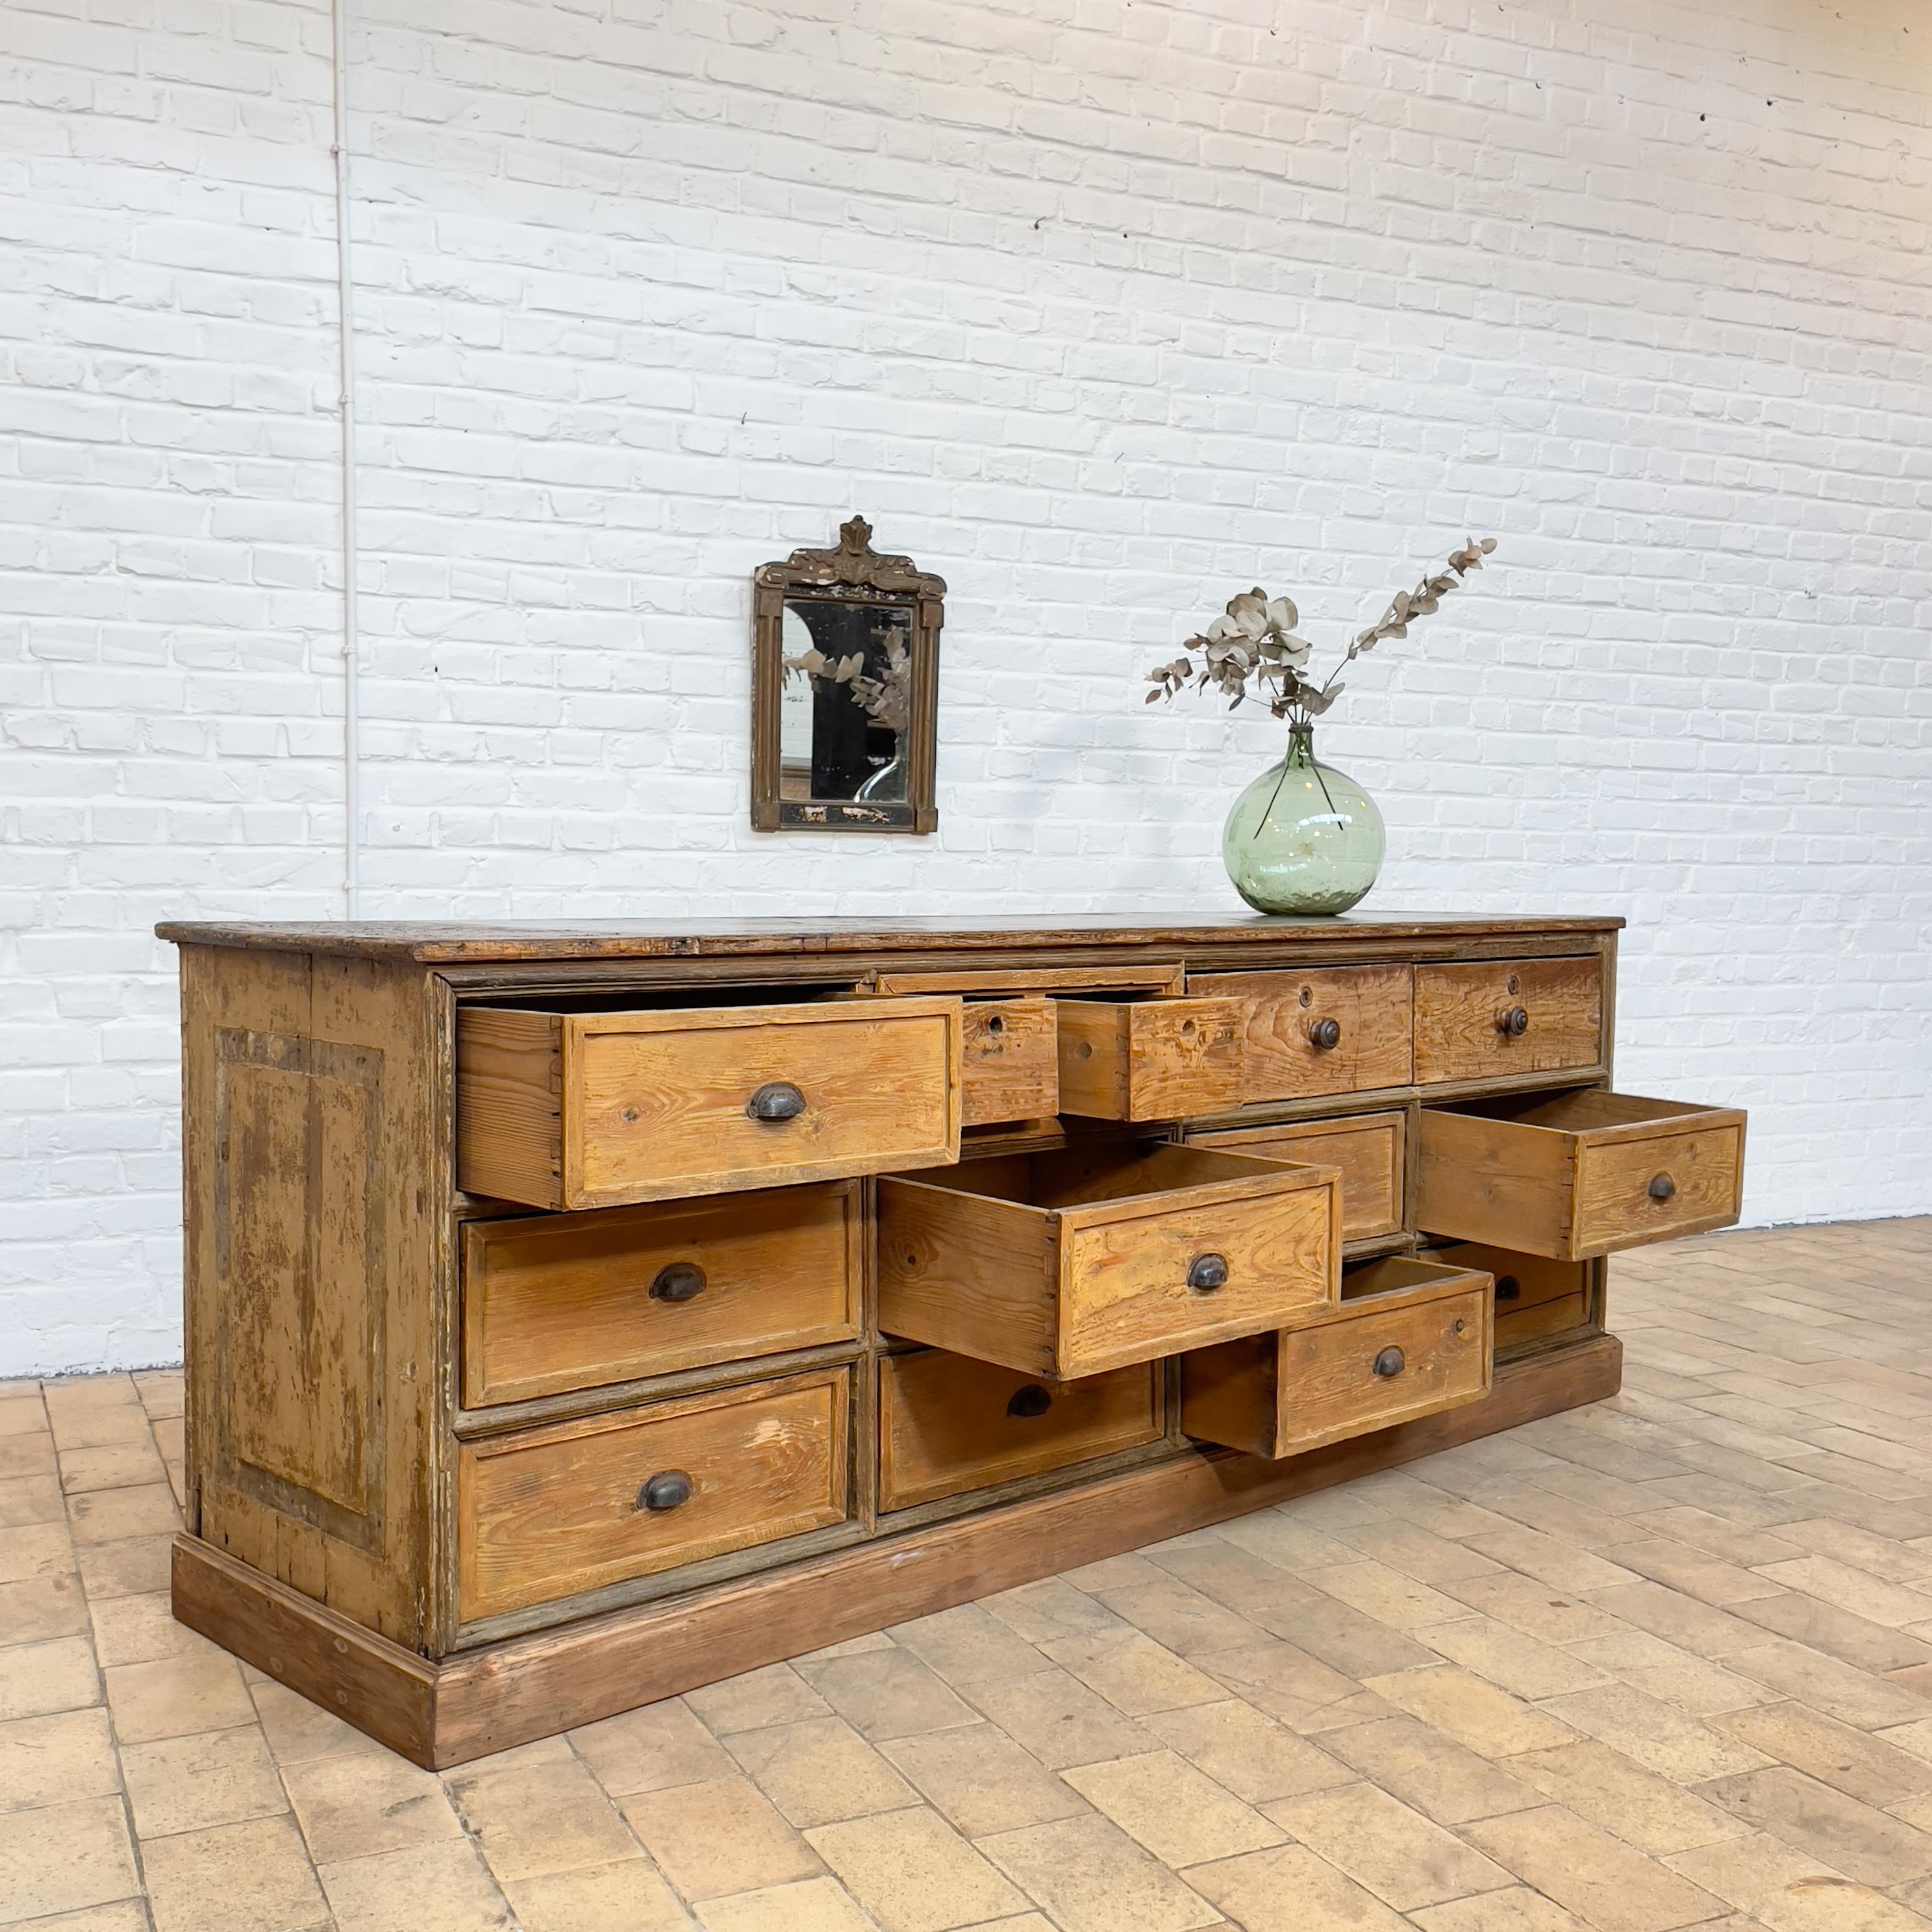 Early 20th century French haberdashery cabinet with drawers
Original patina preserved.
13 drawers including 2 small ones.
Oak and fir.
Good condition.